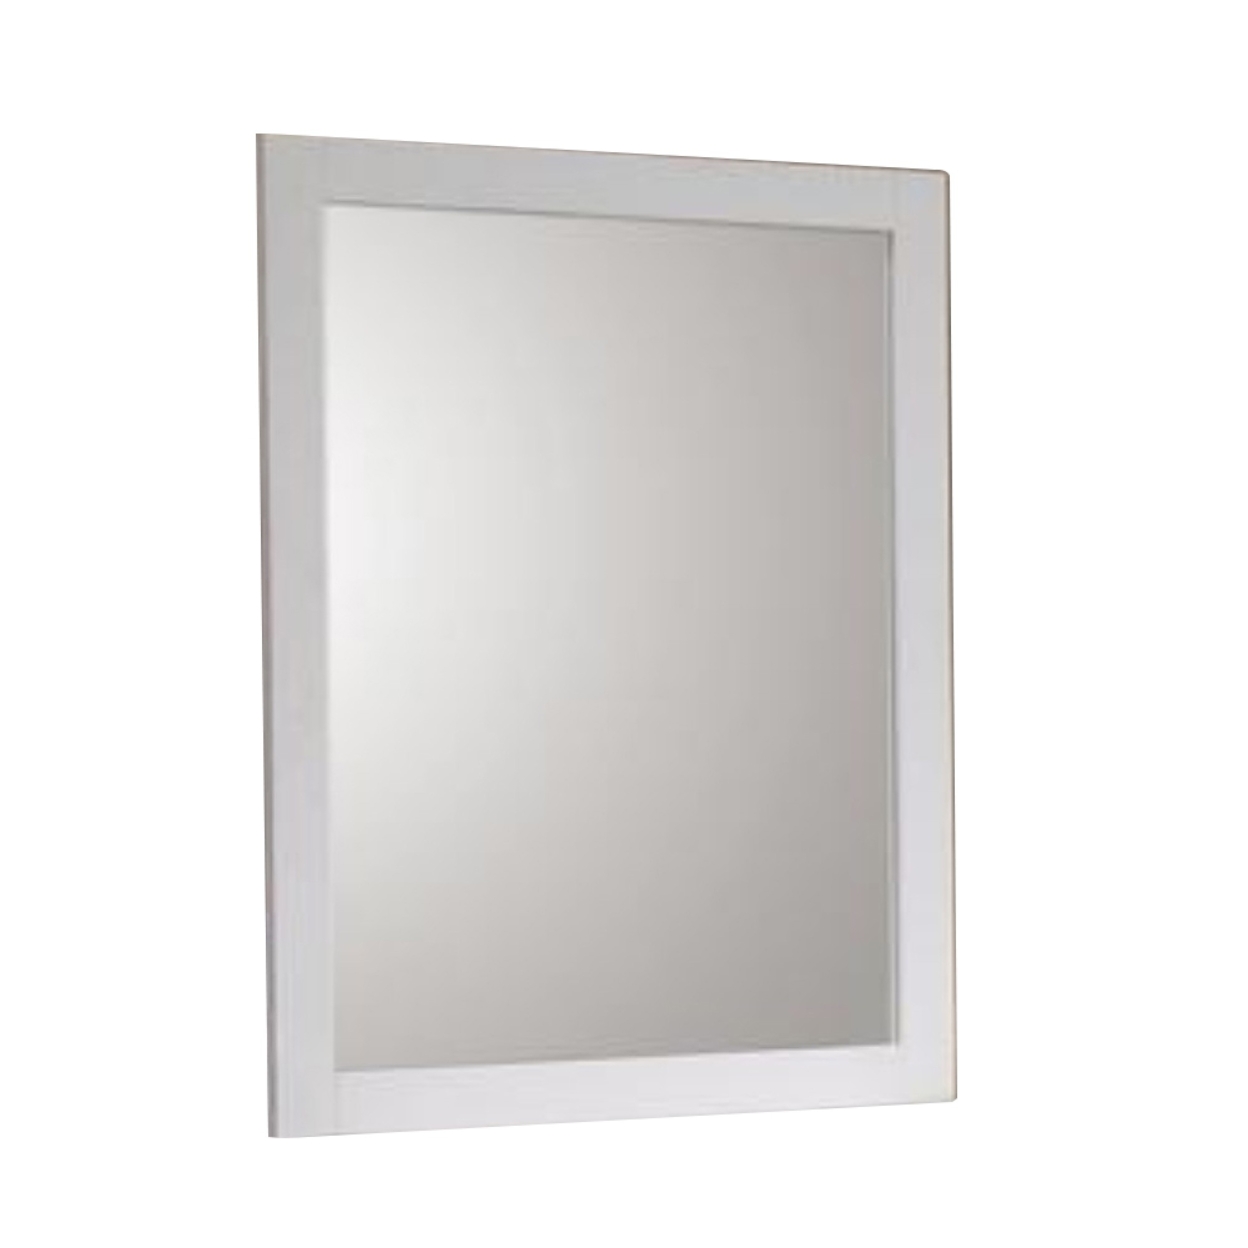 34 Inch Wall Mirror, Classic MDF Rectangular Frame, Solid White